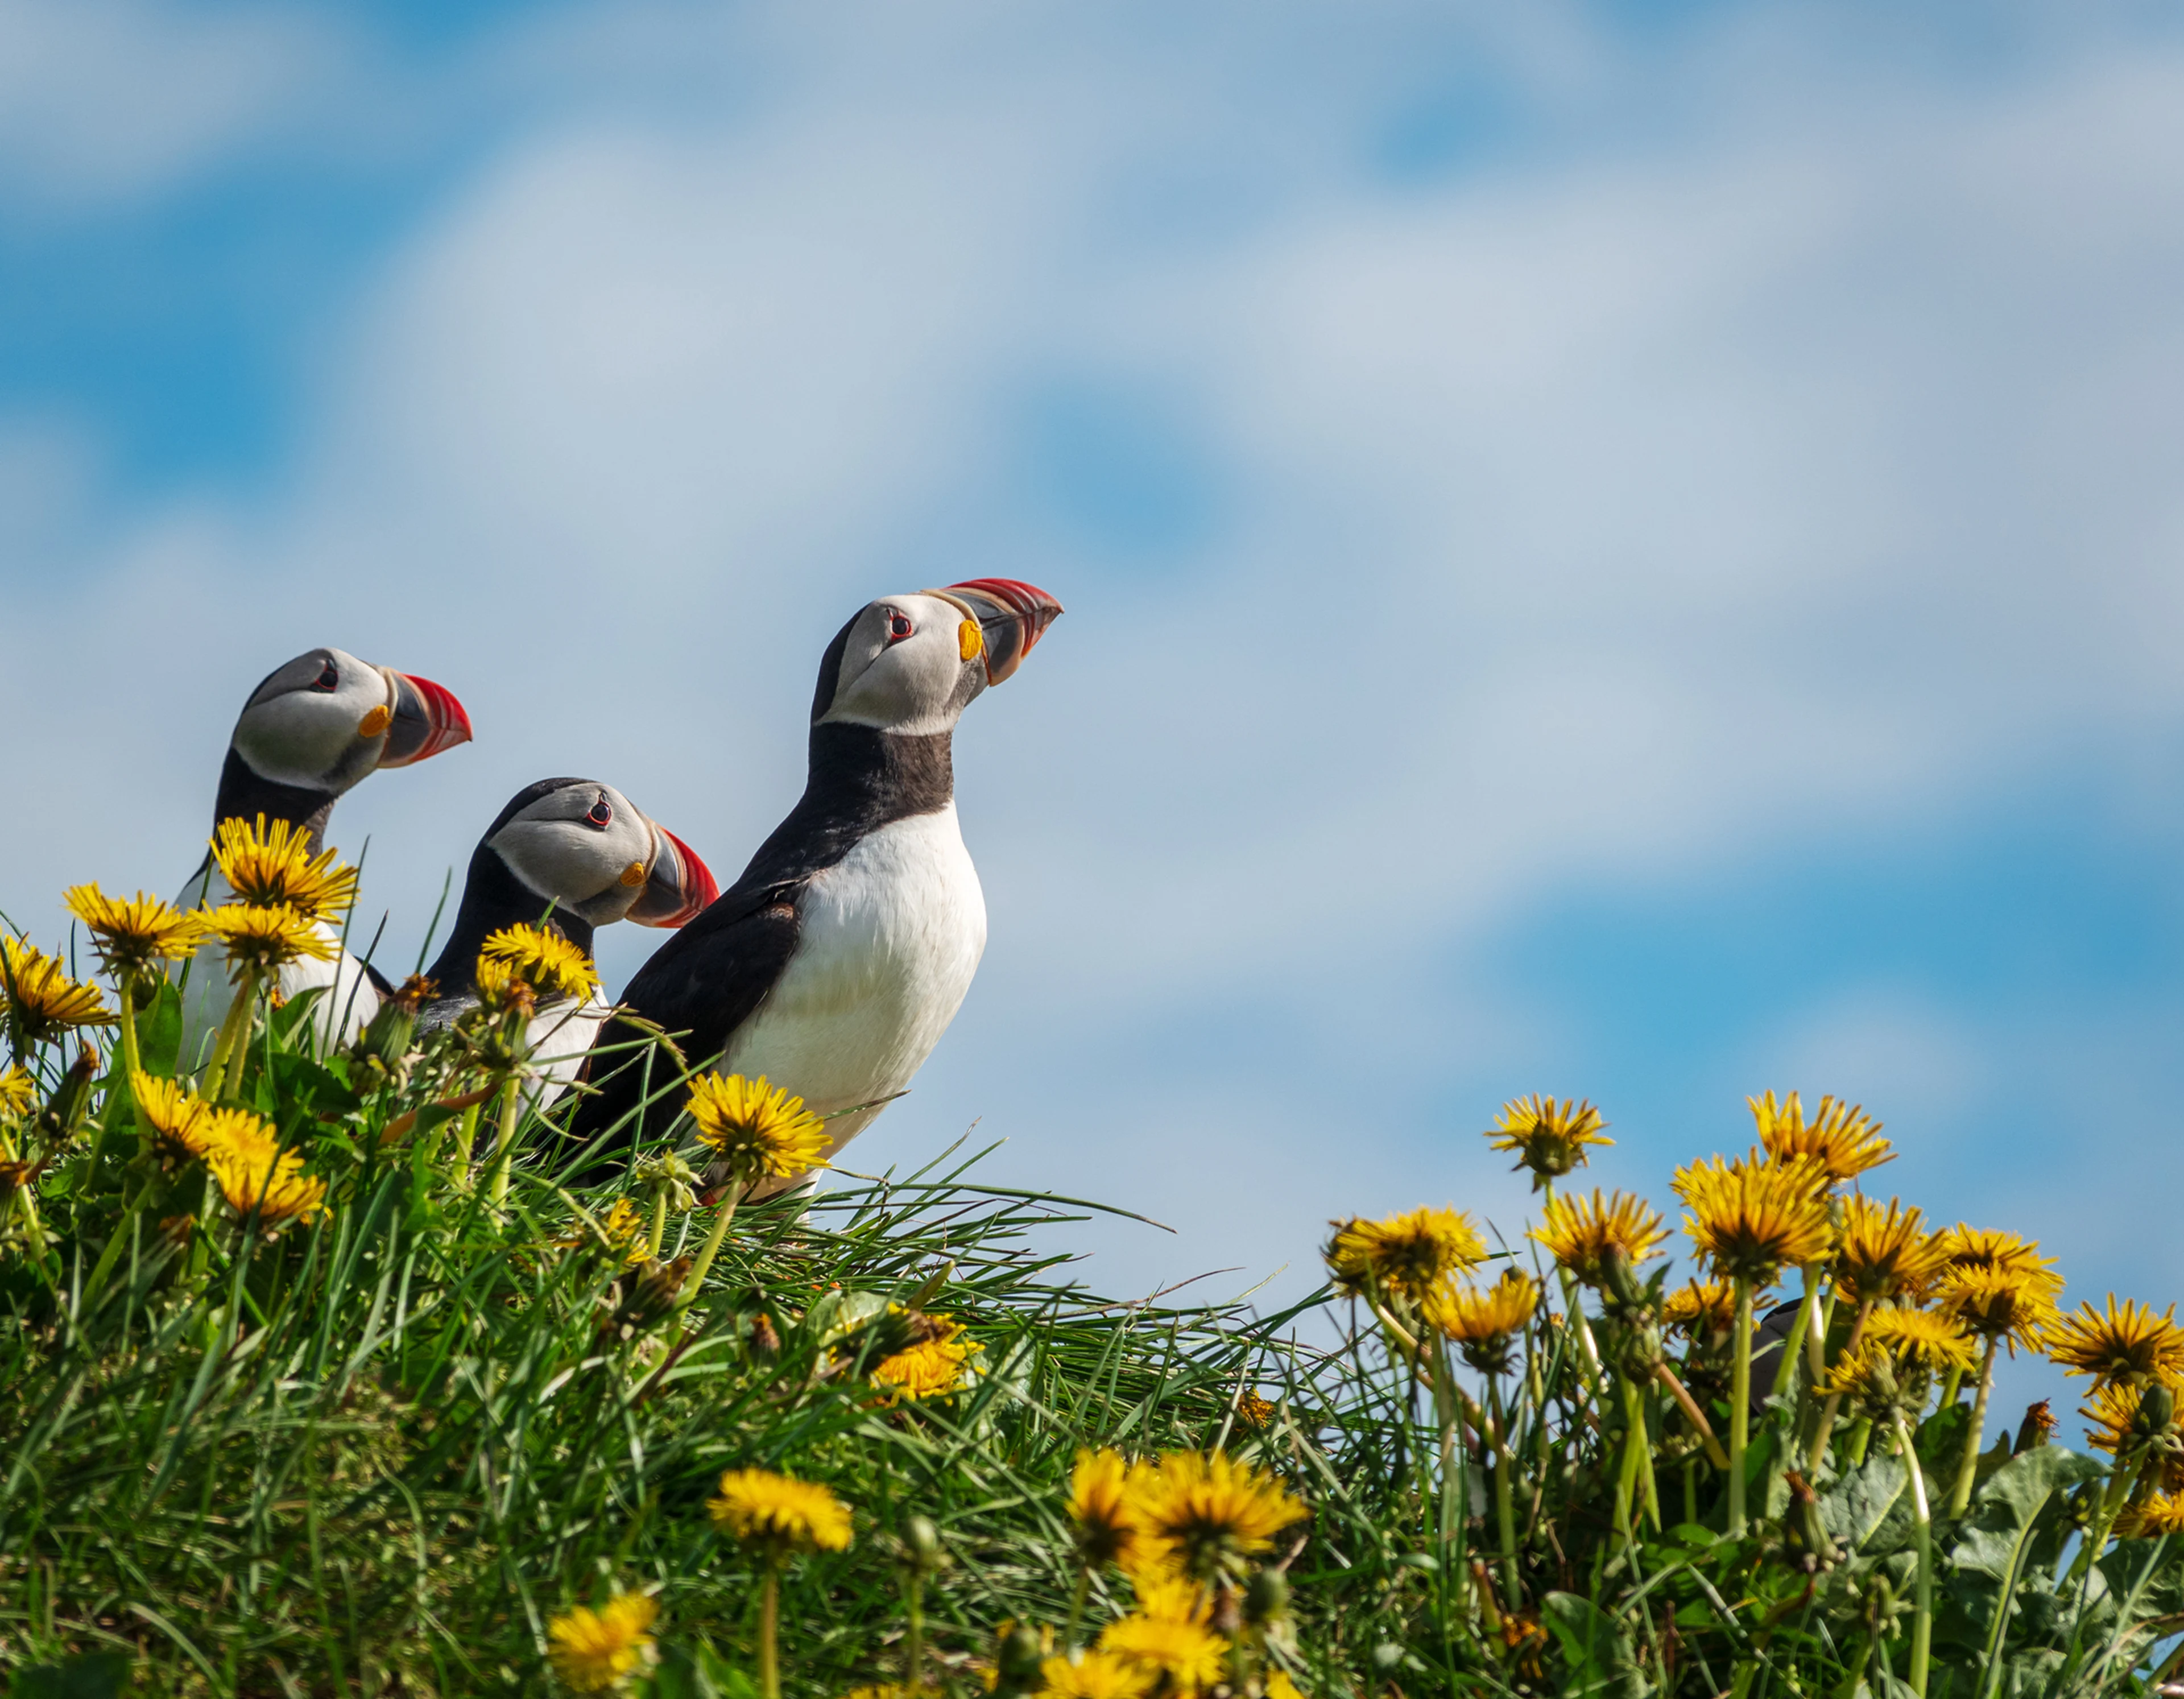 Puffins looking out on Bakkagerði, Iceland